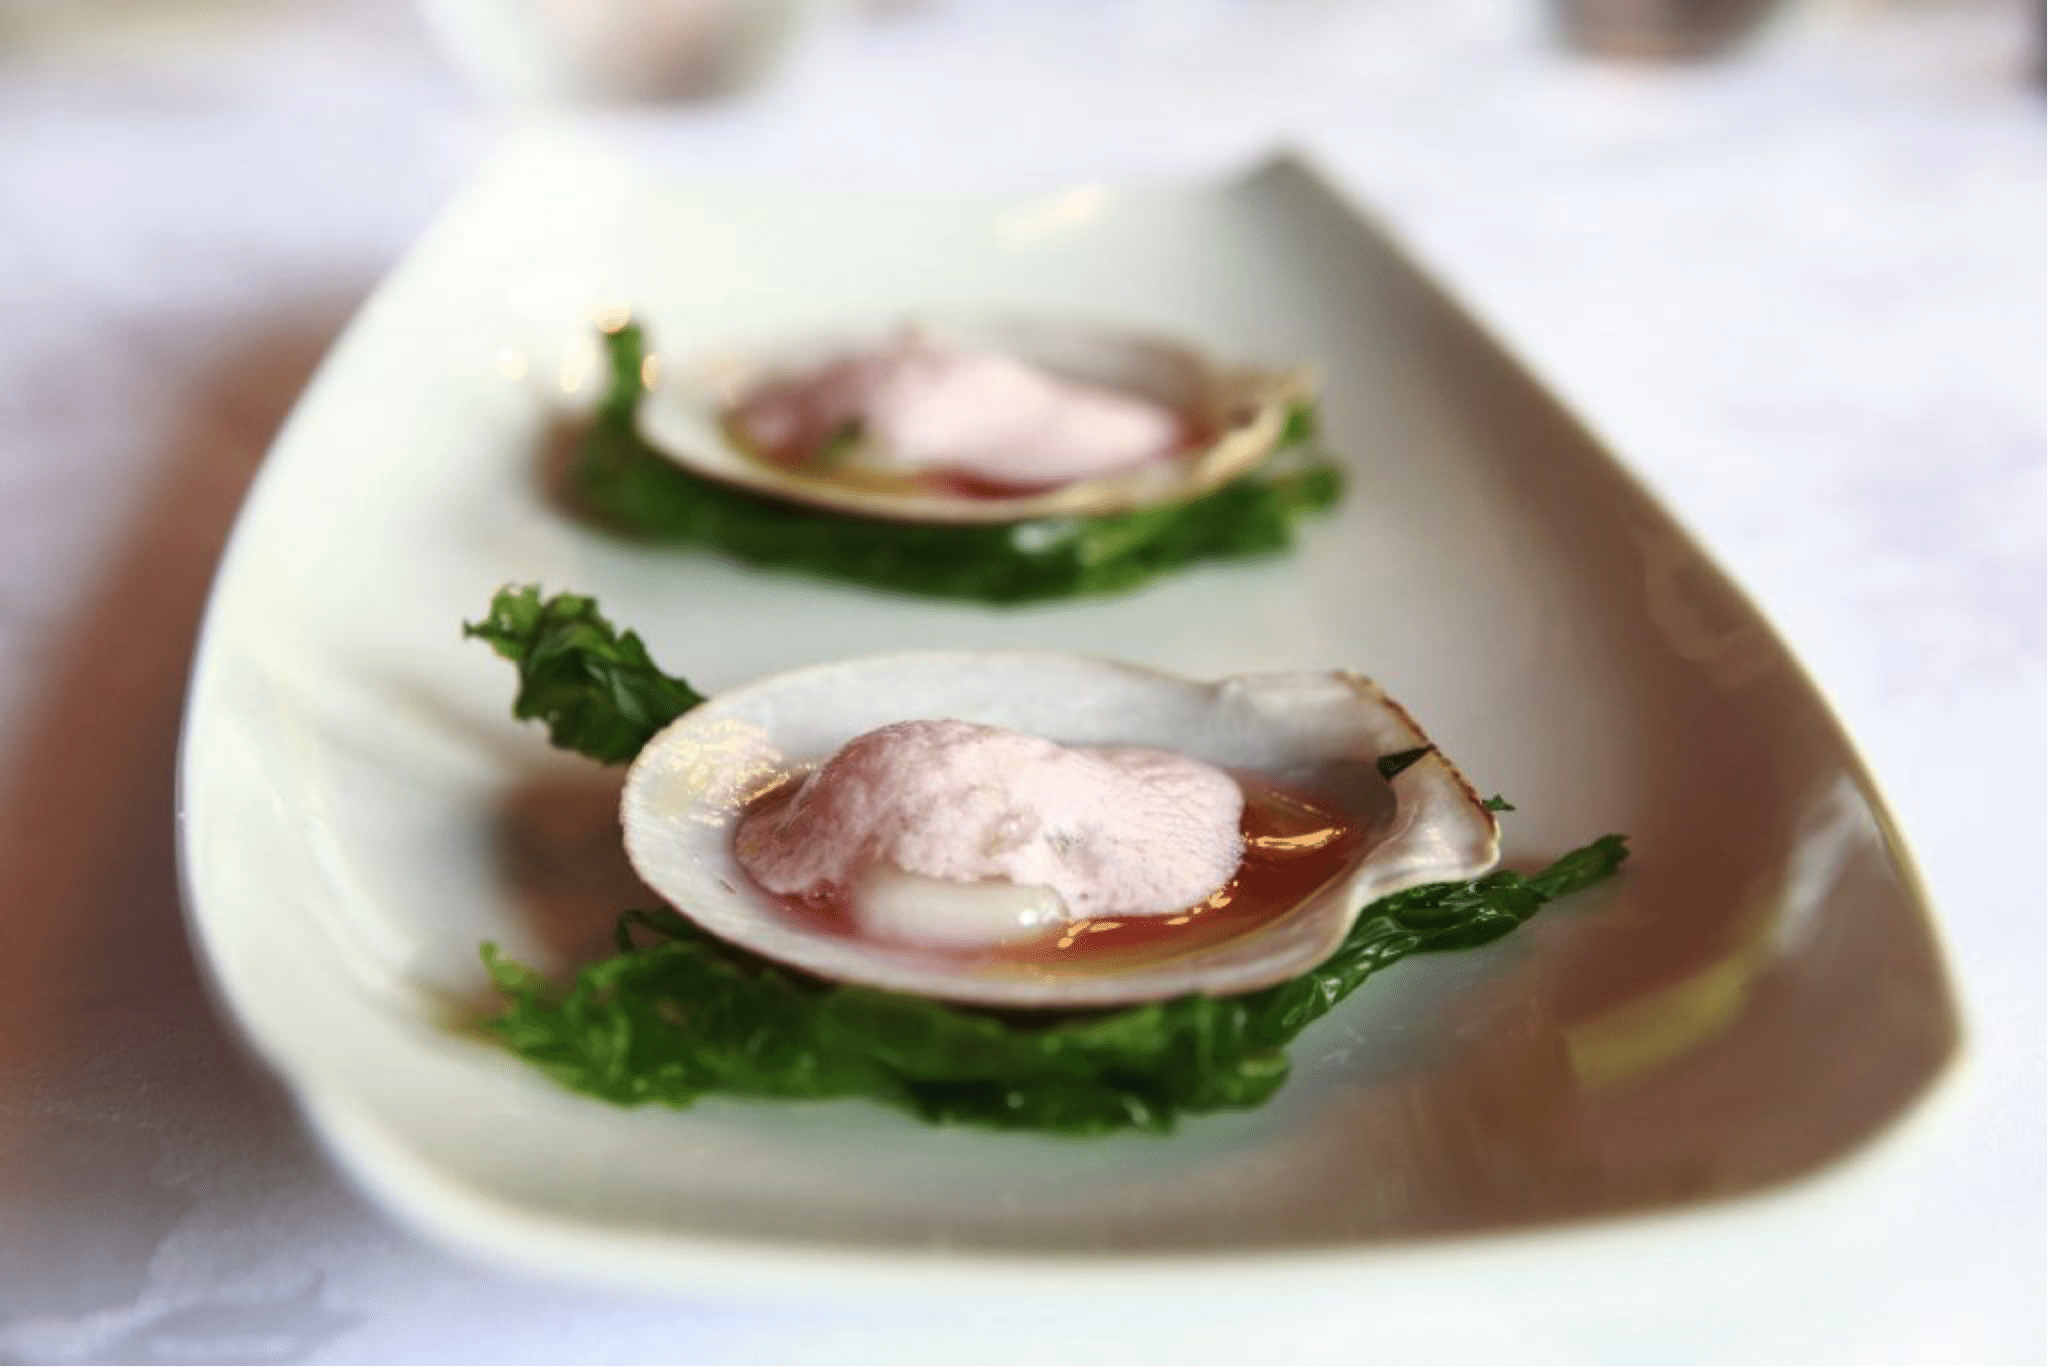 Raw Princess scallops form the Magdalen islands, served on the shell in their refreshing rhubarb water marinade, topped with tarragon-spiked strawberry foam.